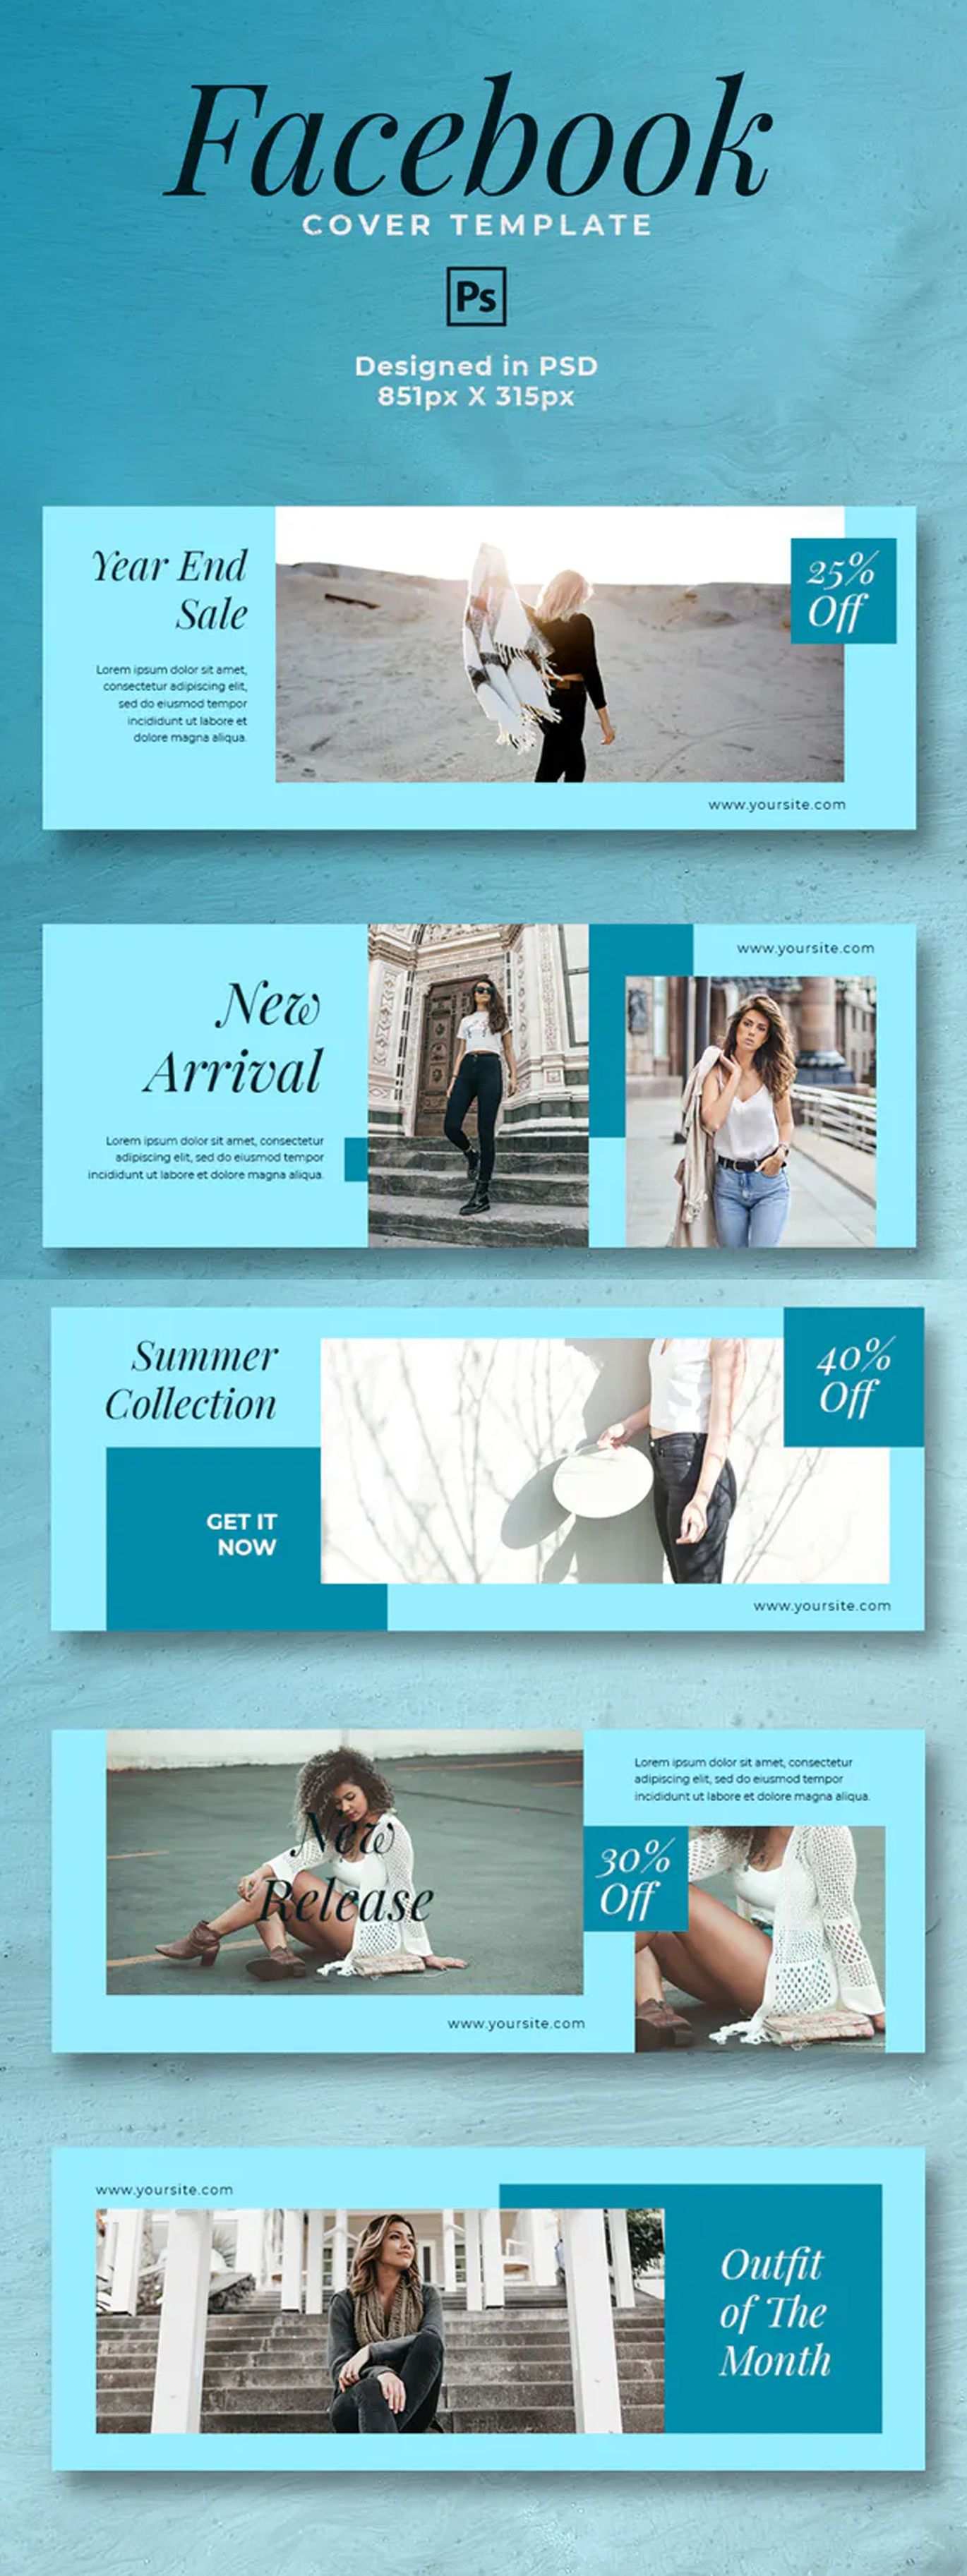 Trend Fashion Facebook Cover Template Psd In 2020 Facebook Cover Template Cover Template Facebook Cover